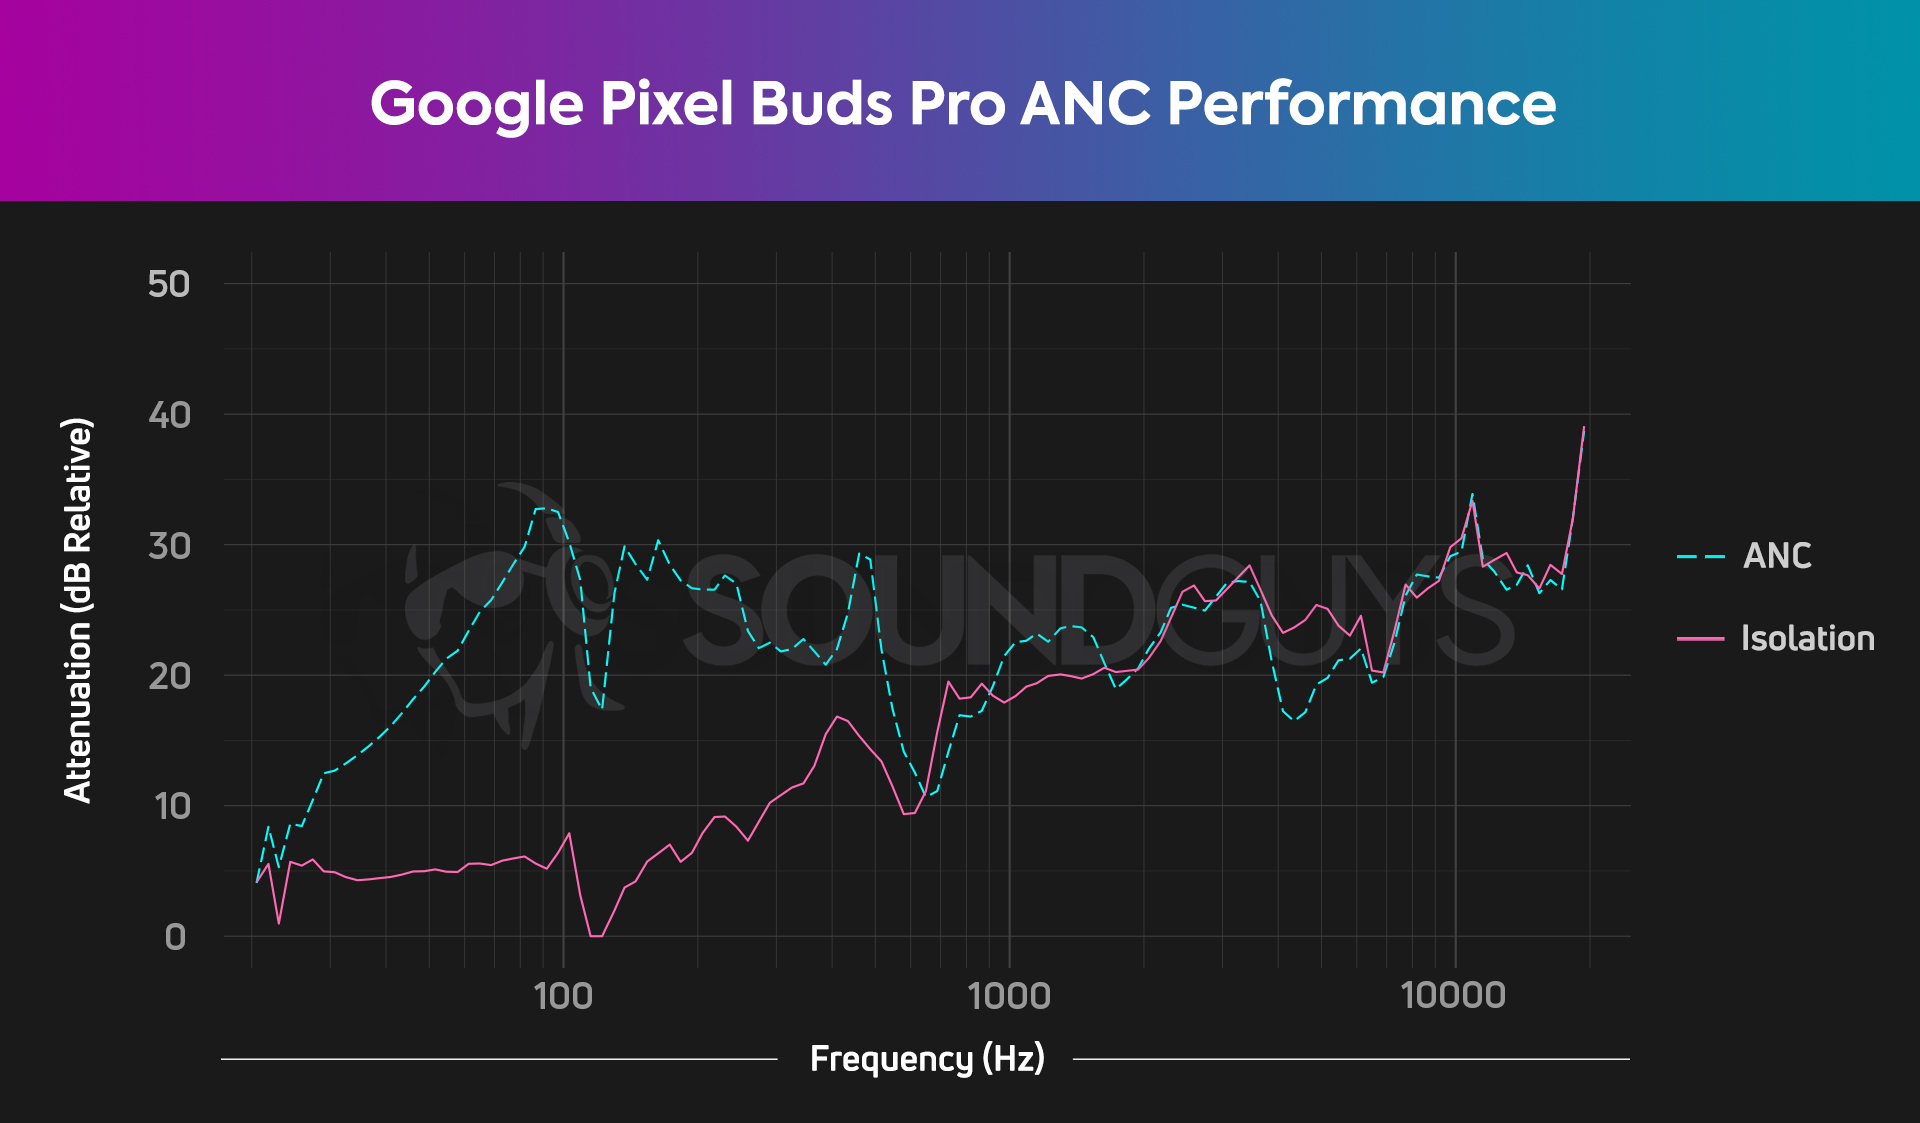 A chart shows the isolation and ANC performance of the Google Pixel Buds Pro, which performs well in the lows and mids.